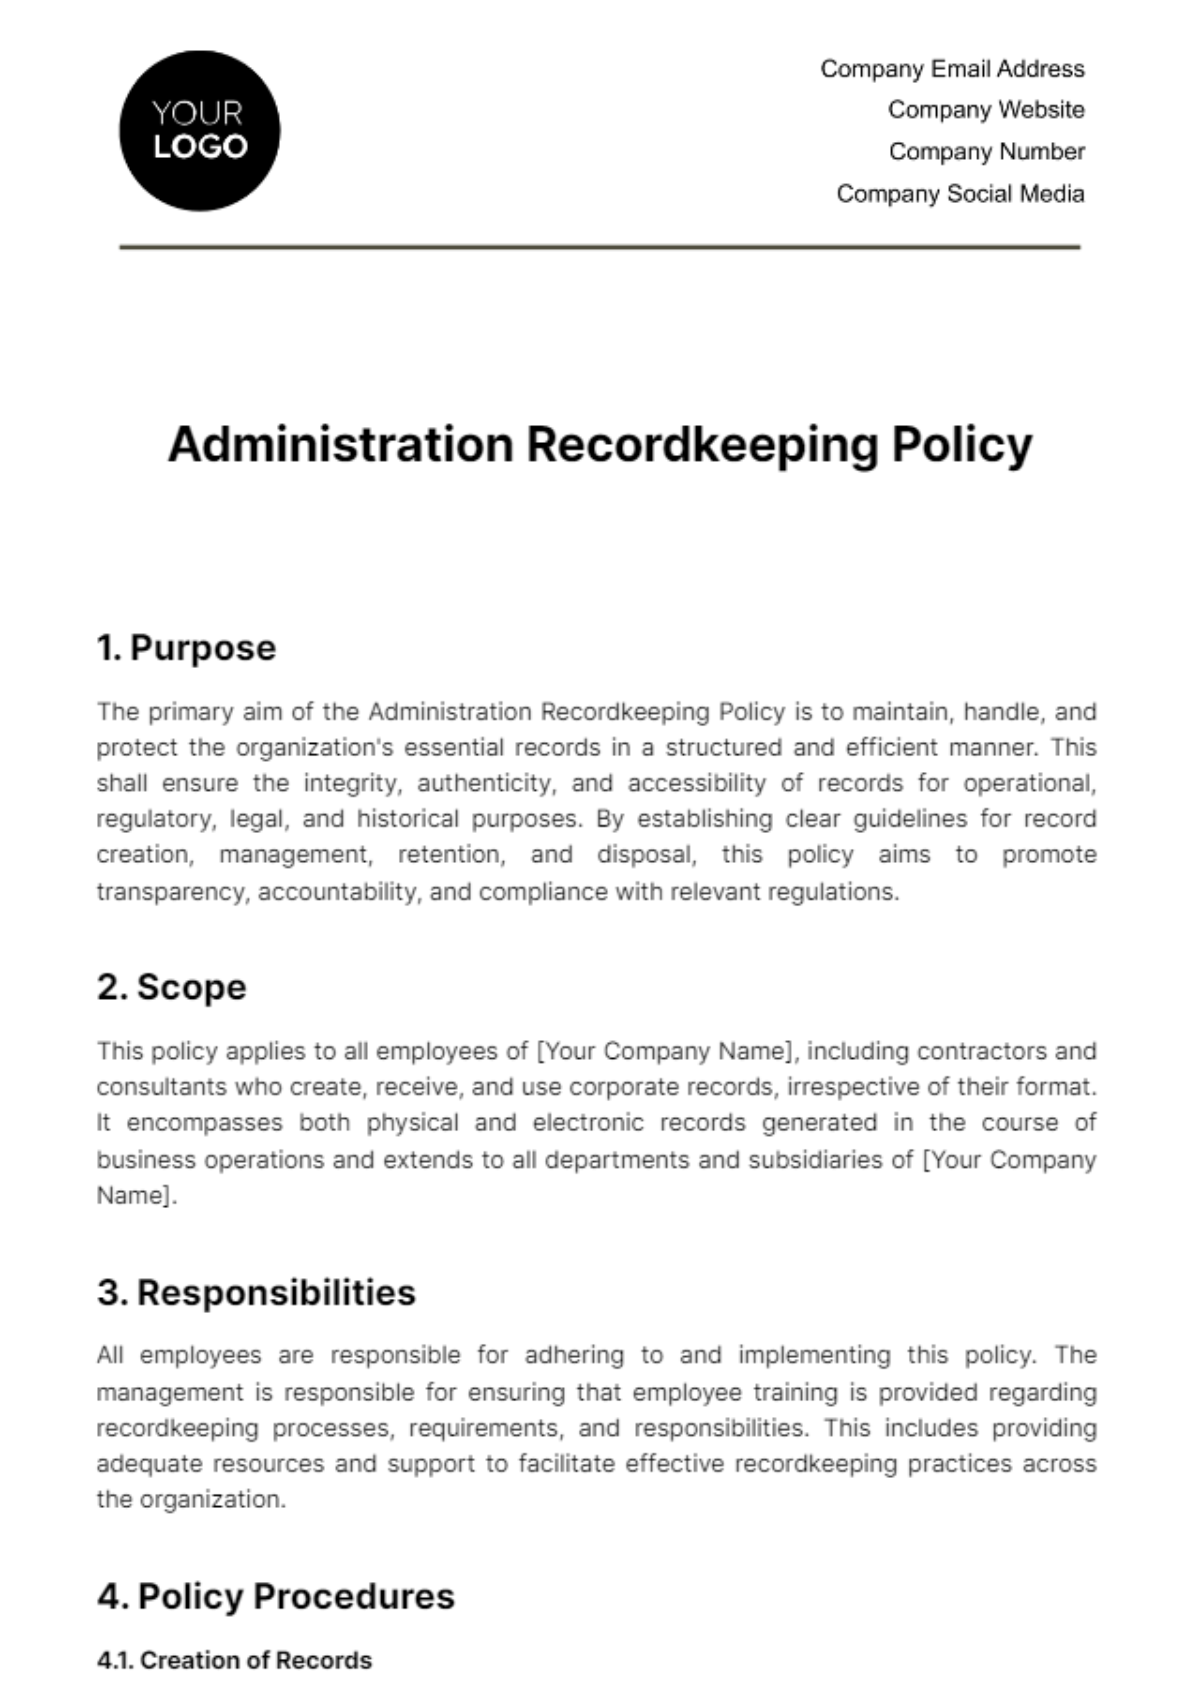 Administration Recordkeeping Policy Template